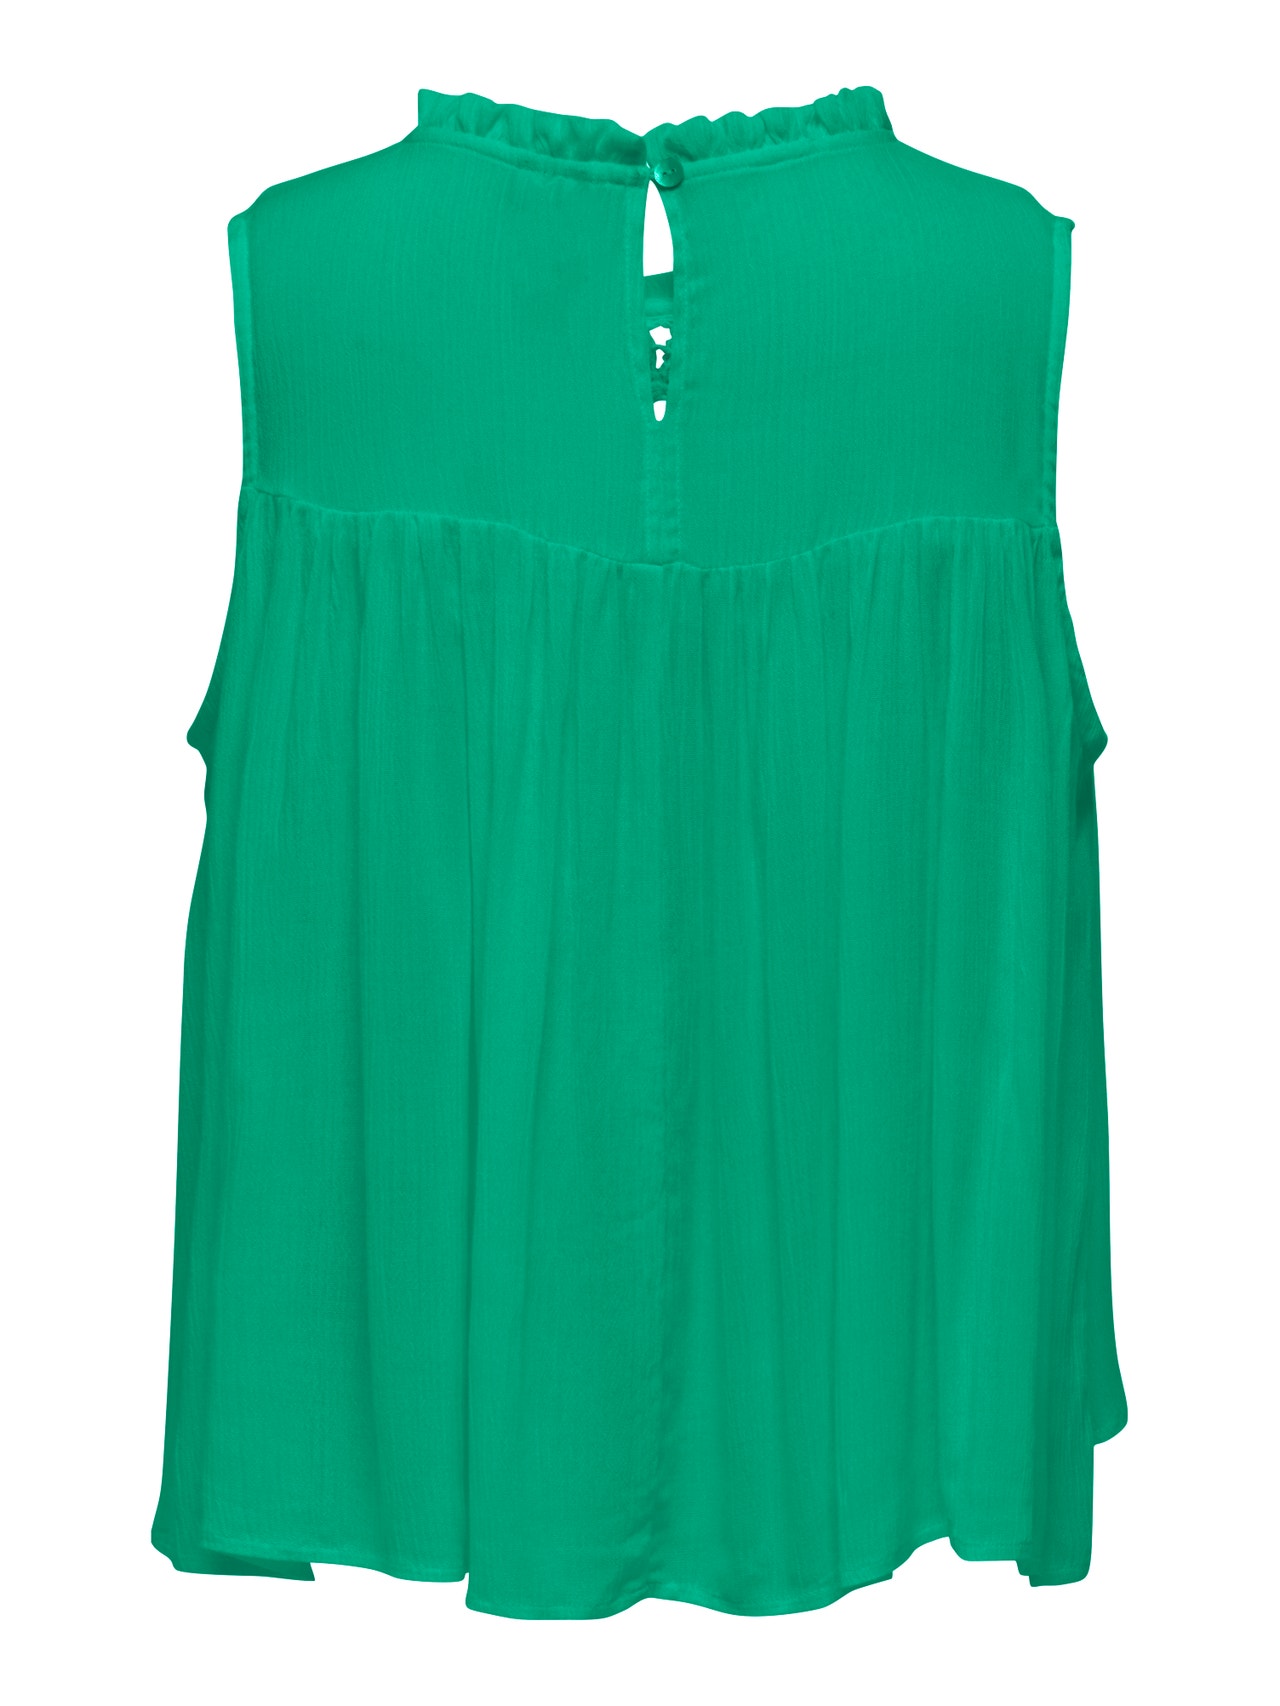 ONLY Relaxed Fit O-Neck Top -Simply Green - 15292078